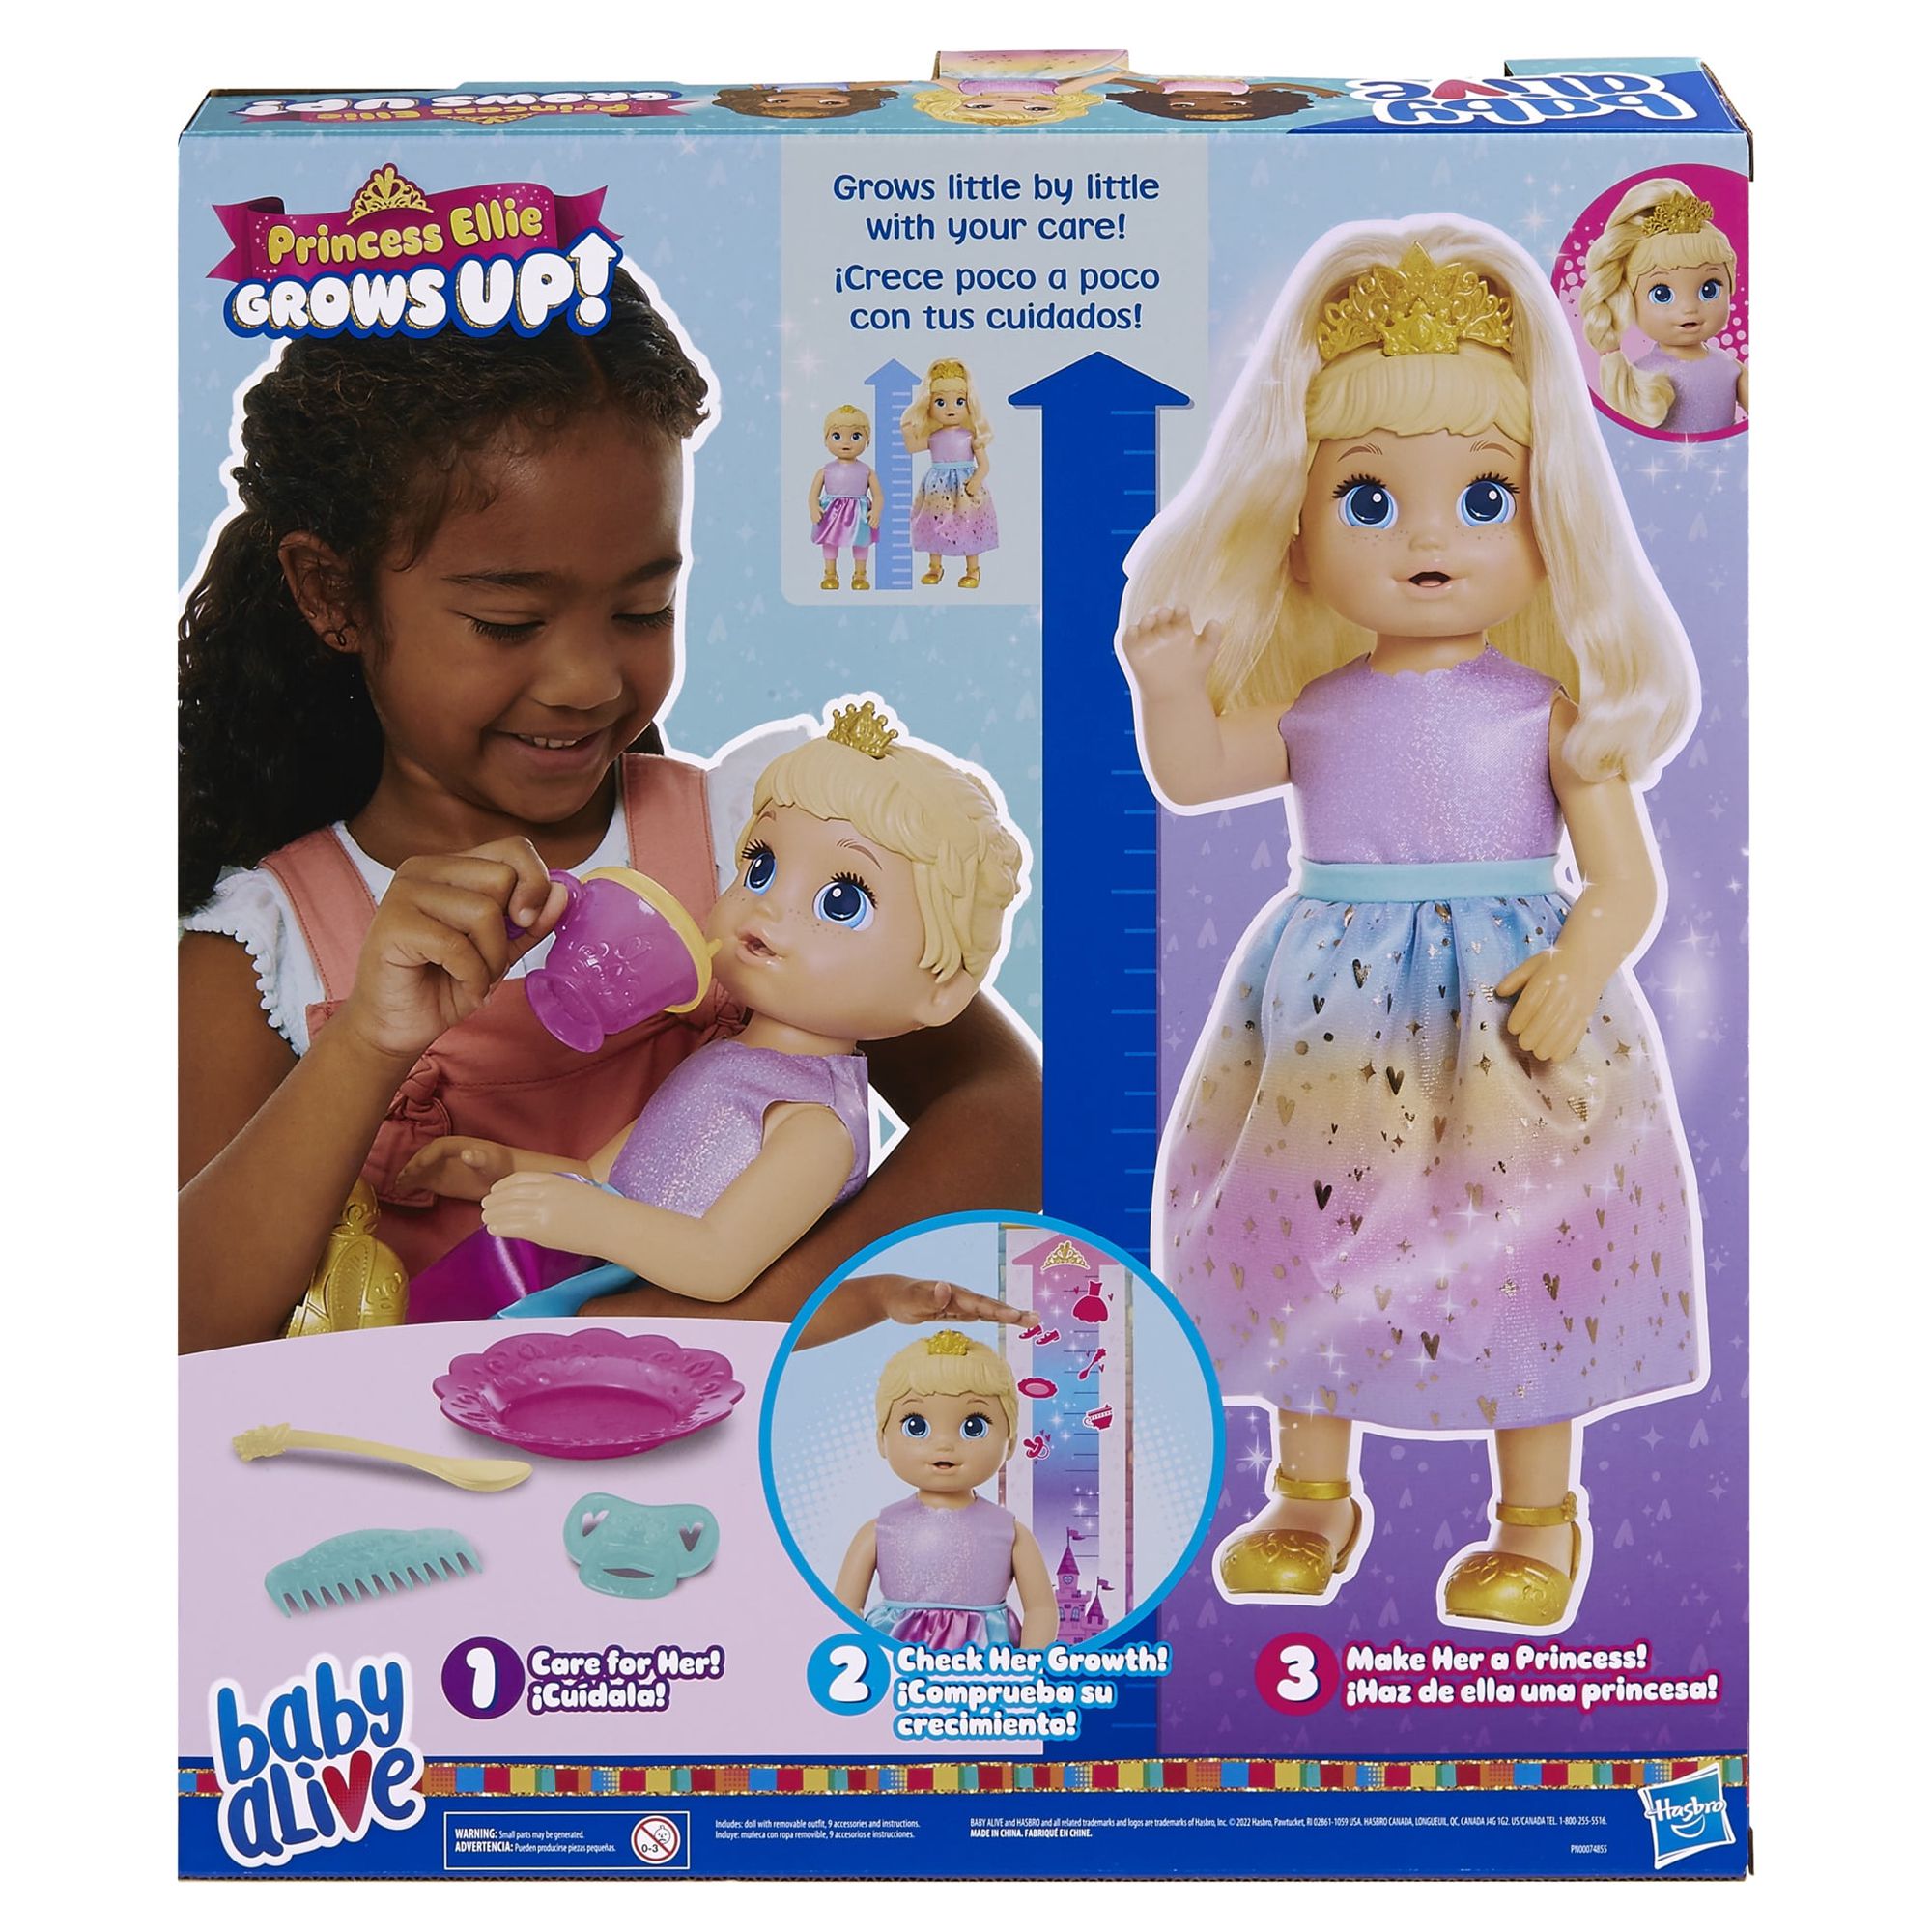 Baby Alive: Princess Ellie Grows Up! 15-Inch Doll Blonde Hair, Blue Eyes Kids Toy for Boys and Girls - image 3 of 12